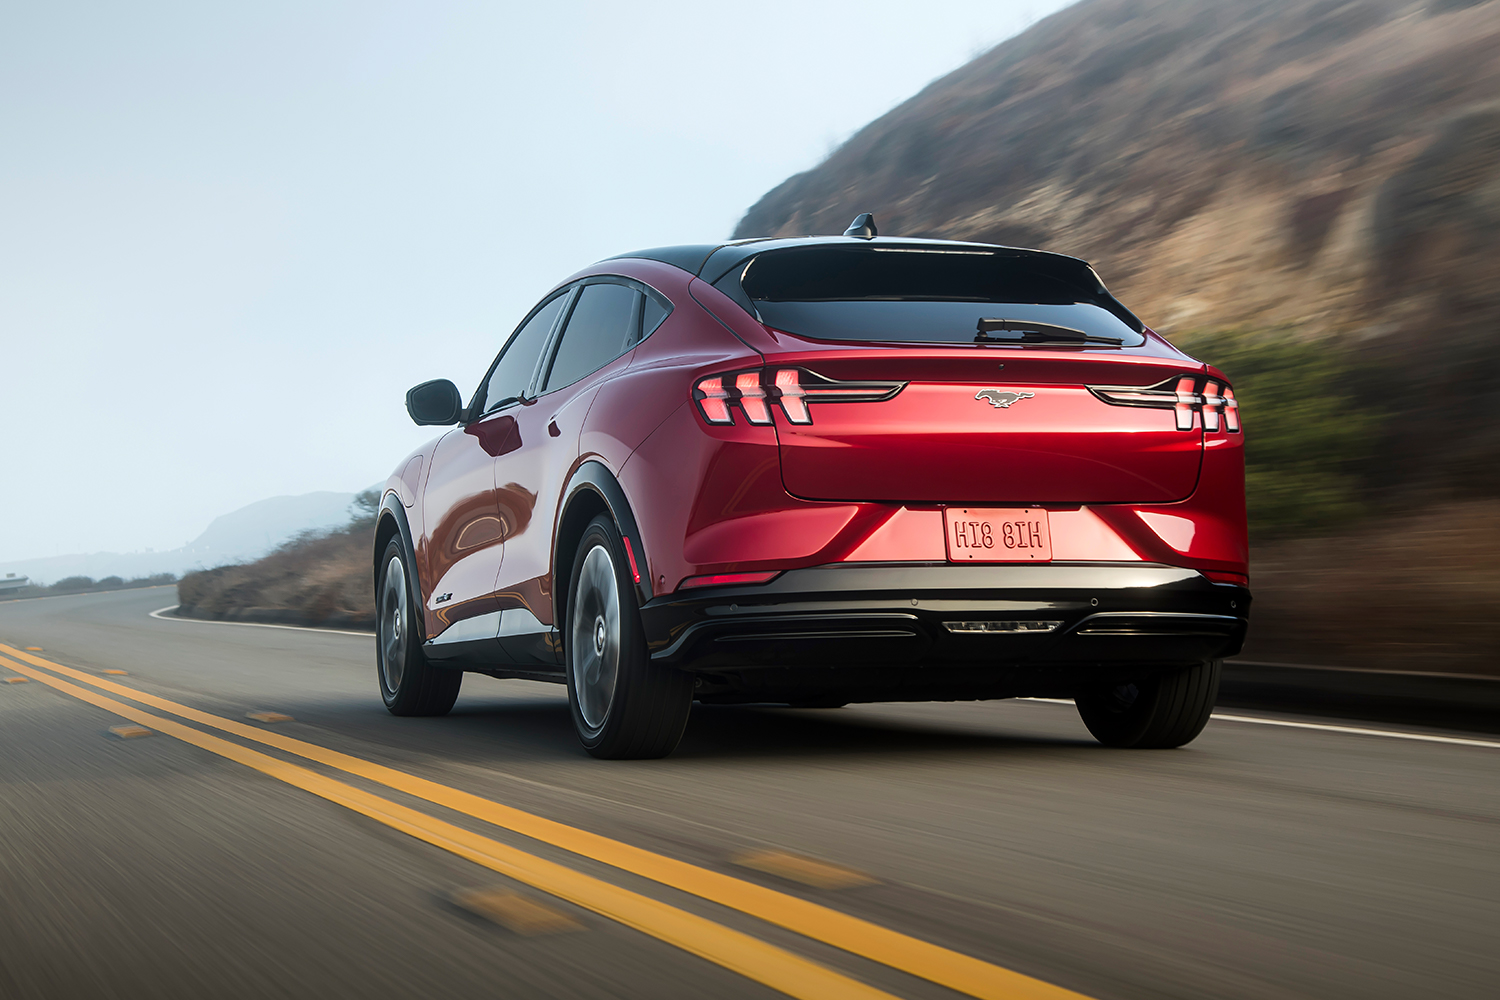 The rear end of a red Ford Mustang Mach-E driving down the road. Here's our review of the electric crossover.